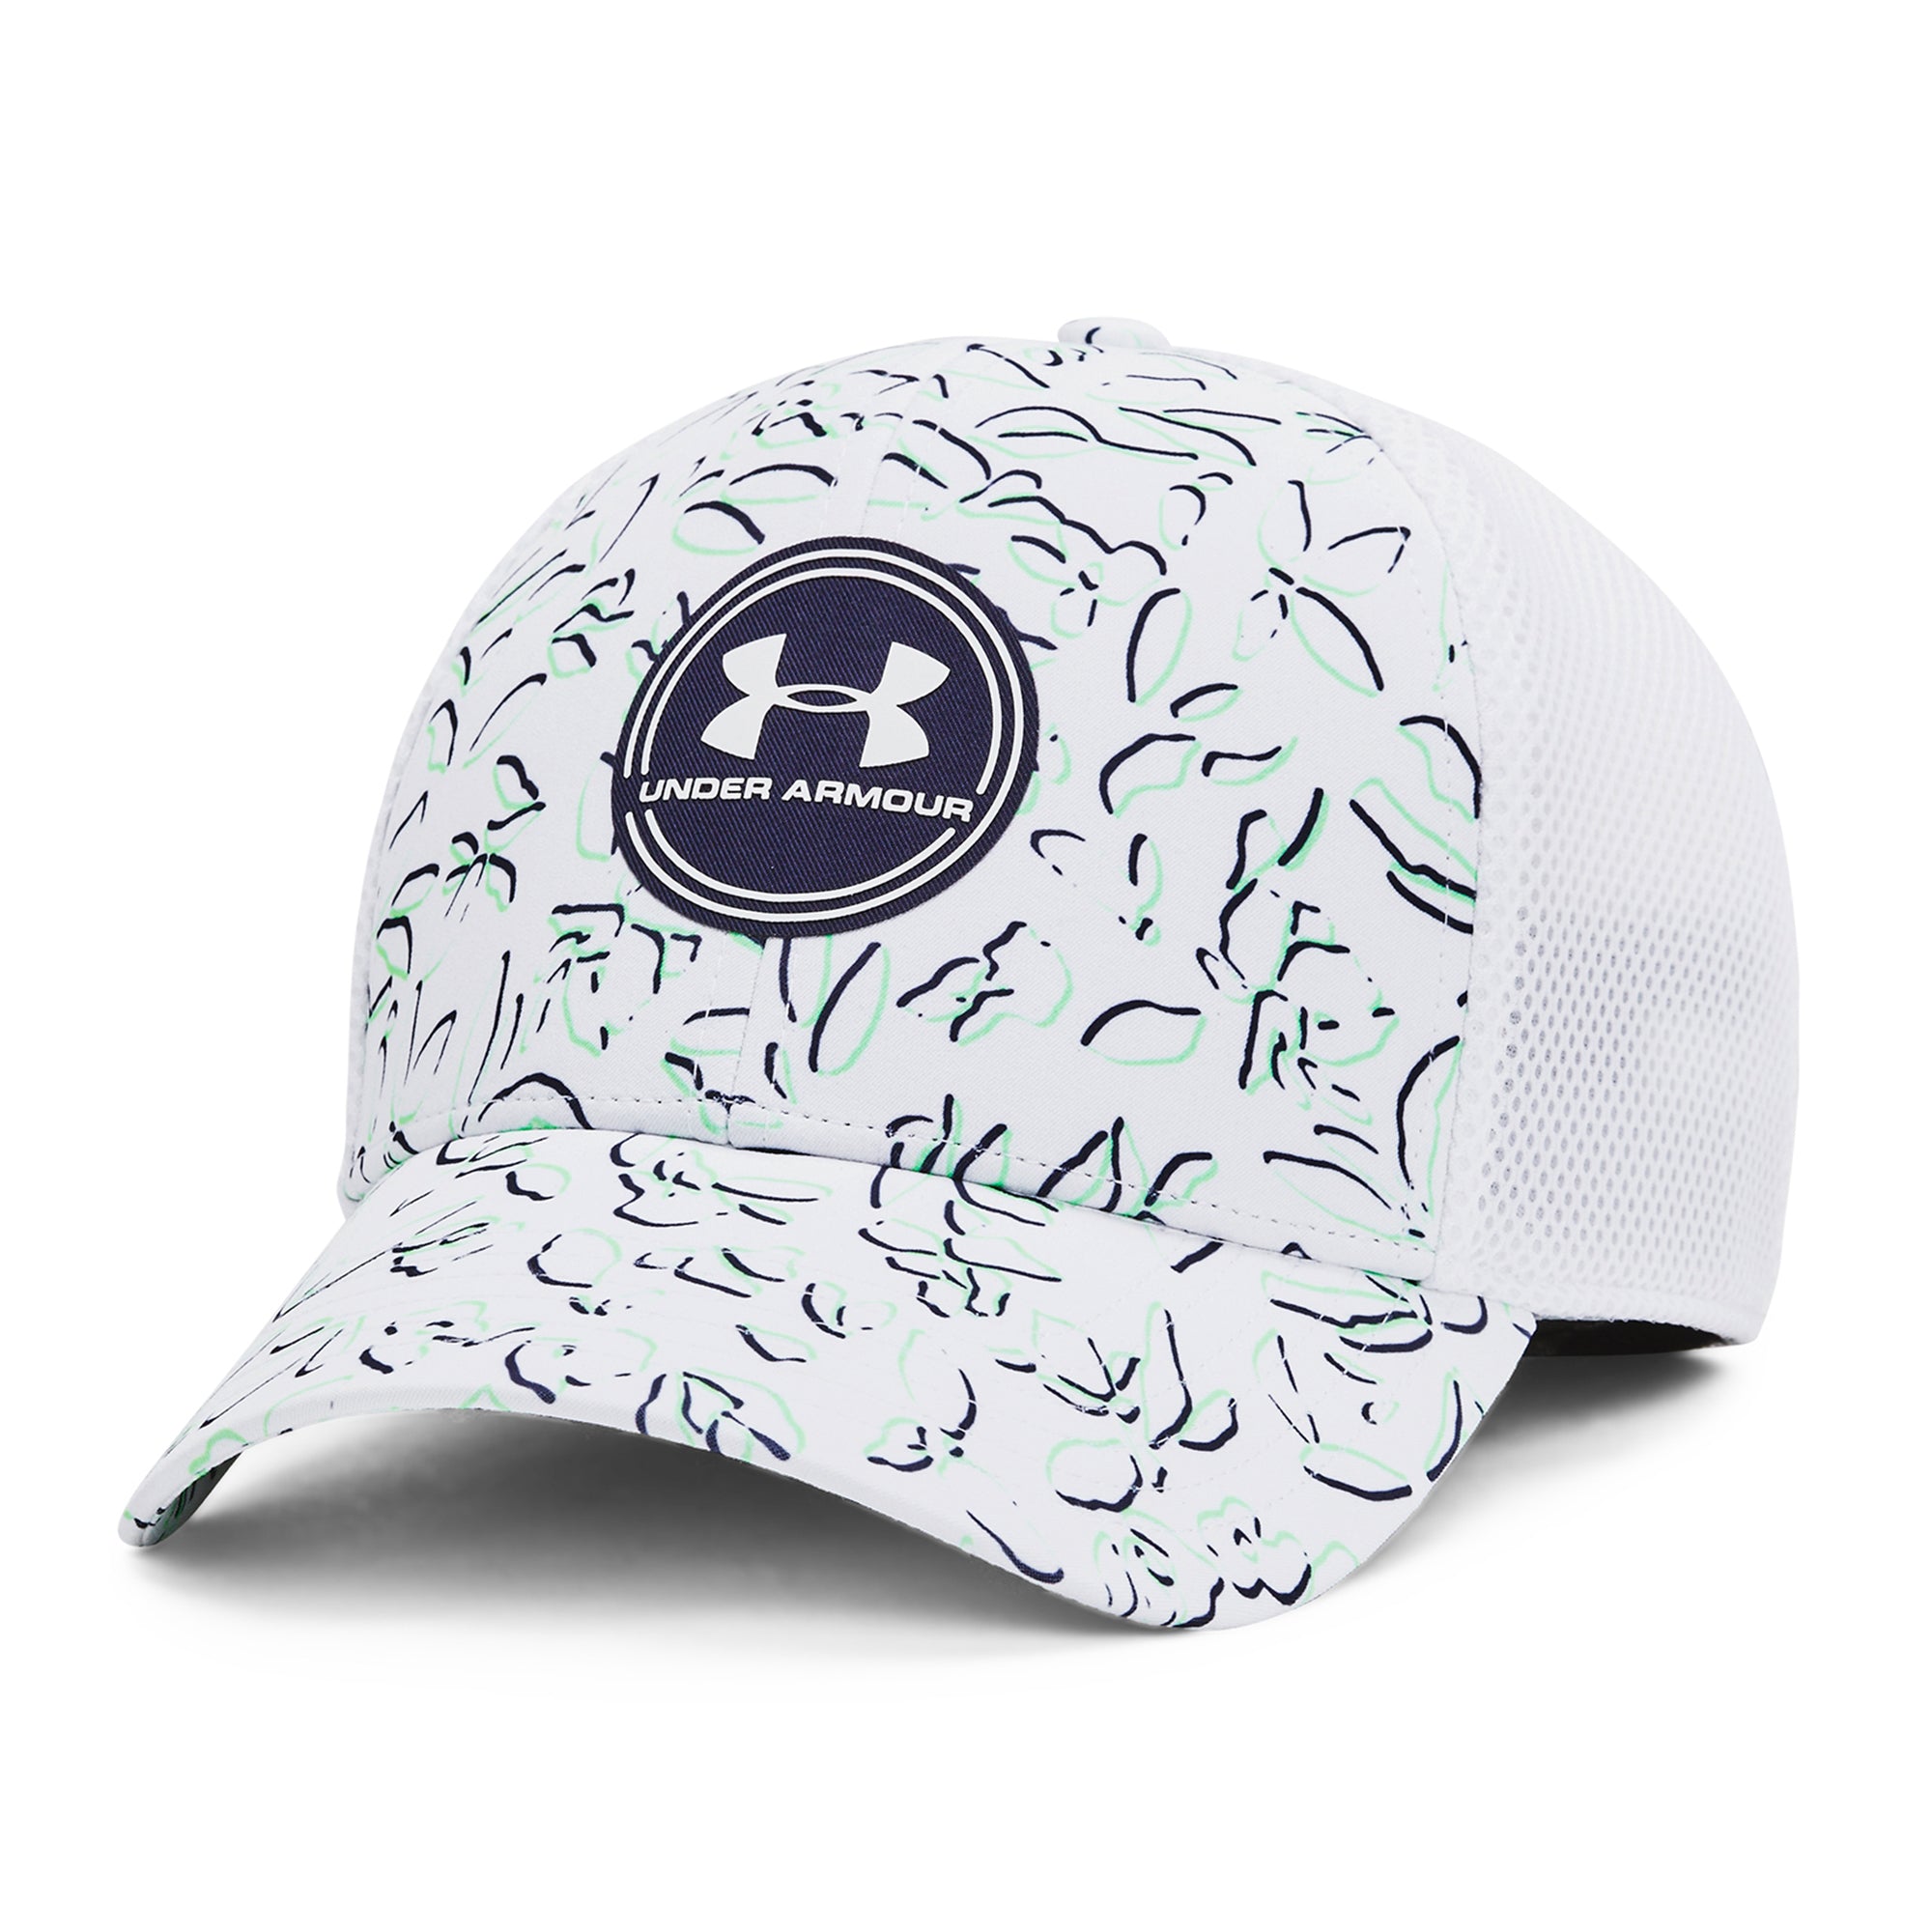 Under Armour Golf Iso-chill Driver Mesh Cap White M-L 1369804-105-M/L